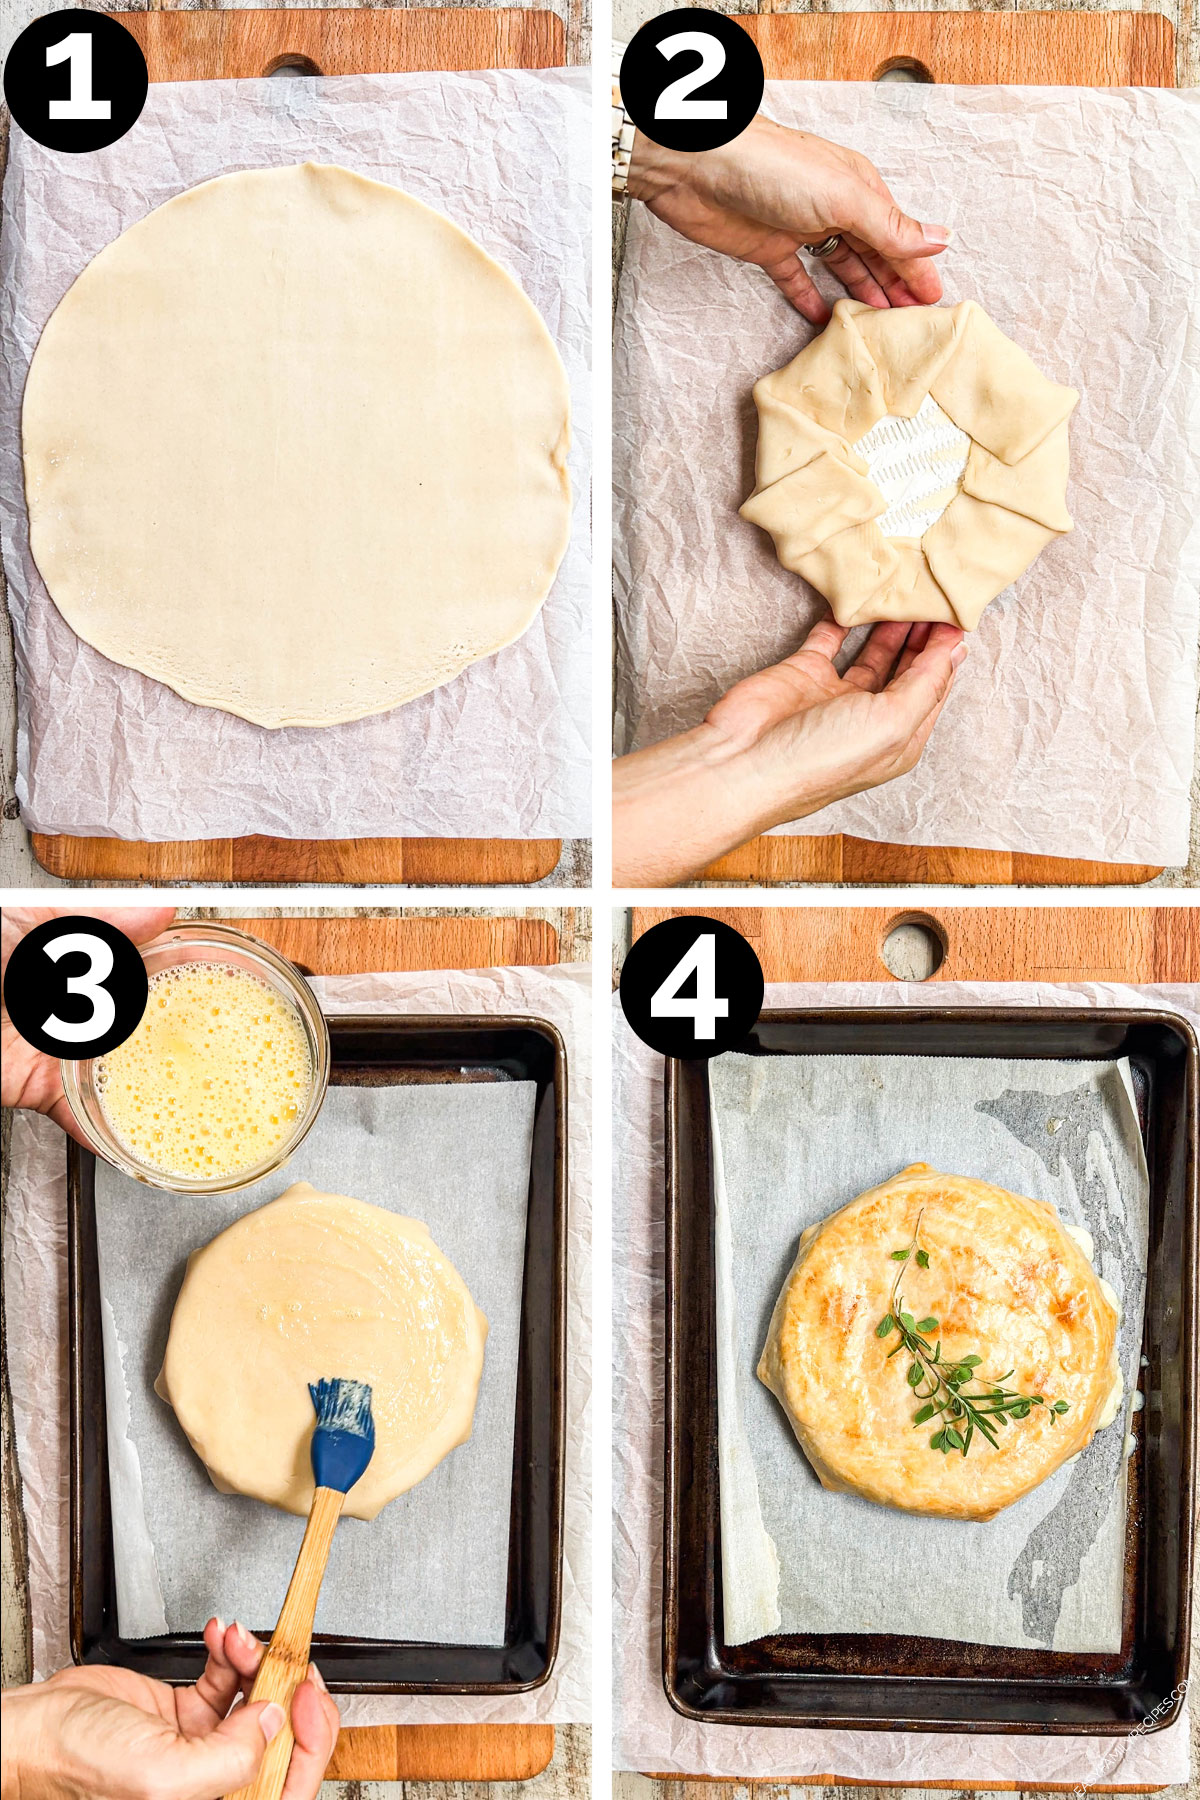 how to bake brie in pie crust, 1) lay out pie crust, 2)add brie and fold up, 3) top with egg wash on a baking sheet, 4)bake and serve!